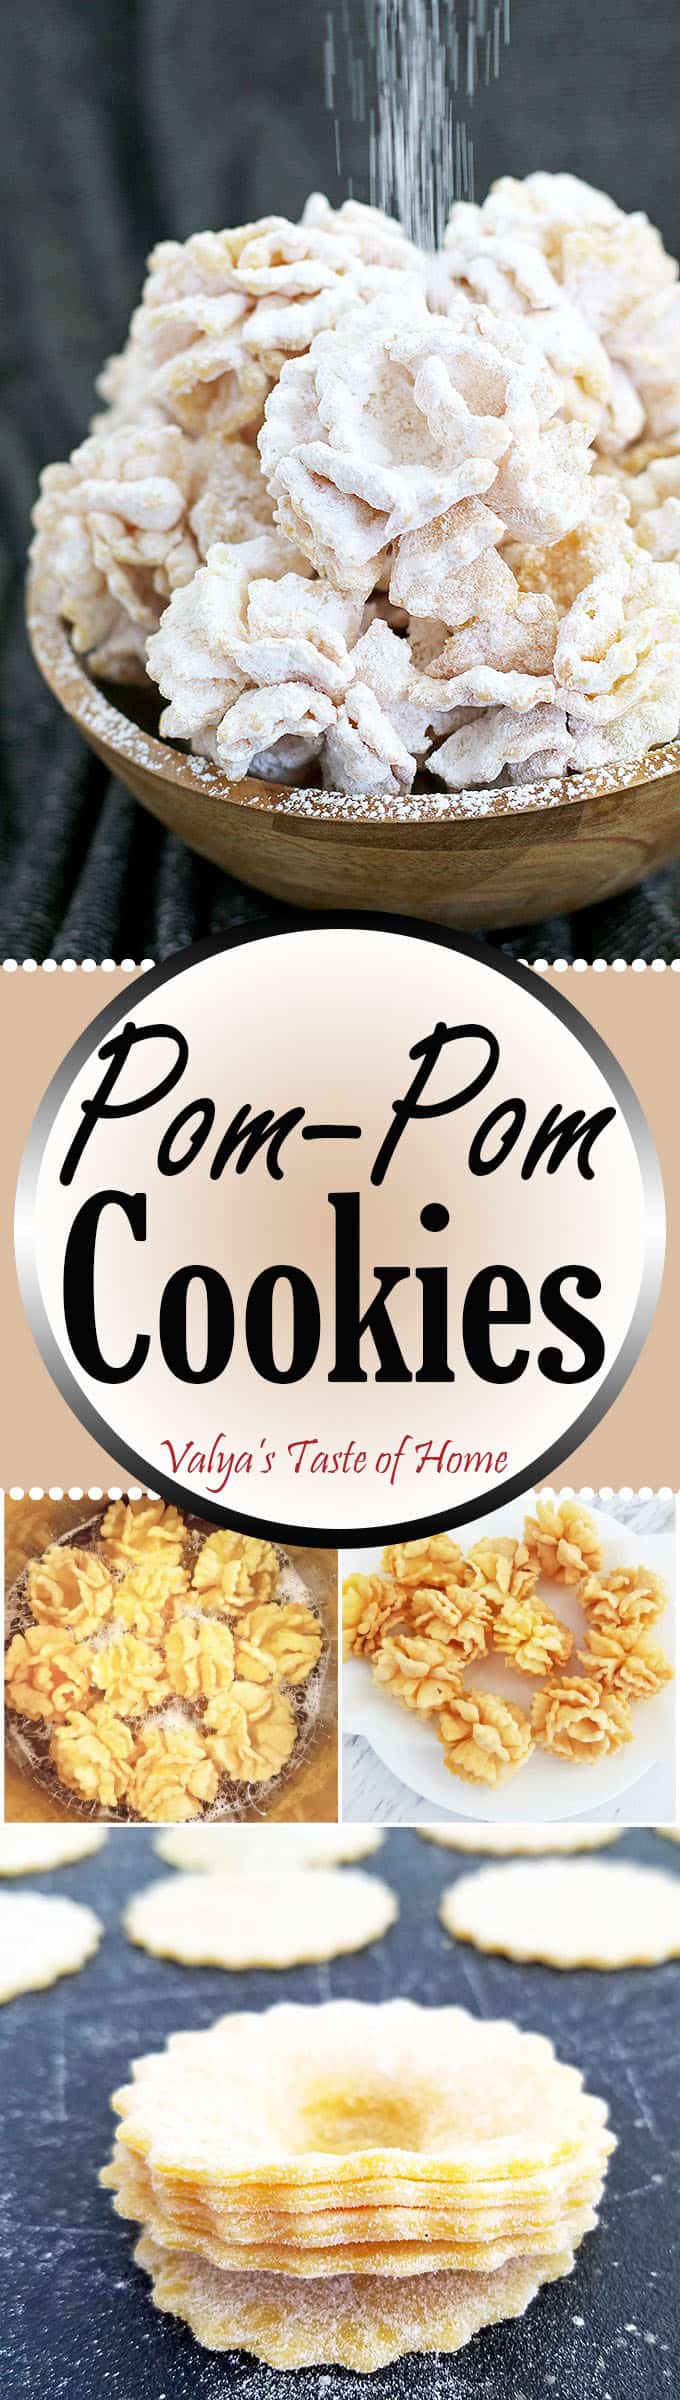 These Pom-Pom Cookies Recipe is traditionally known as “Hvorost” in Russian or “Hrustiki” in Ukraine. They are not only easy and delicious but also make a gorgeous dessert décor! There is plenty to celebrate in the near future.